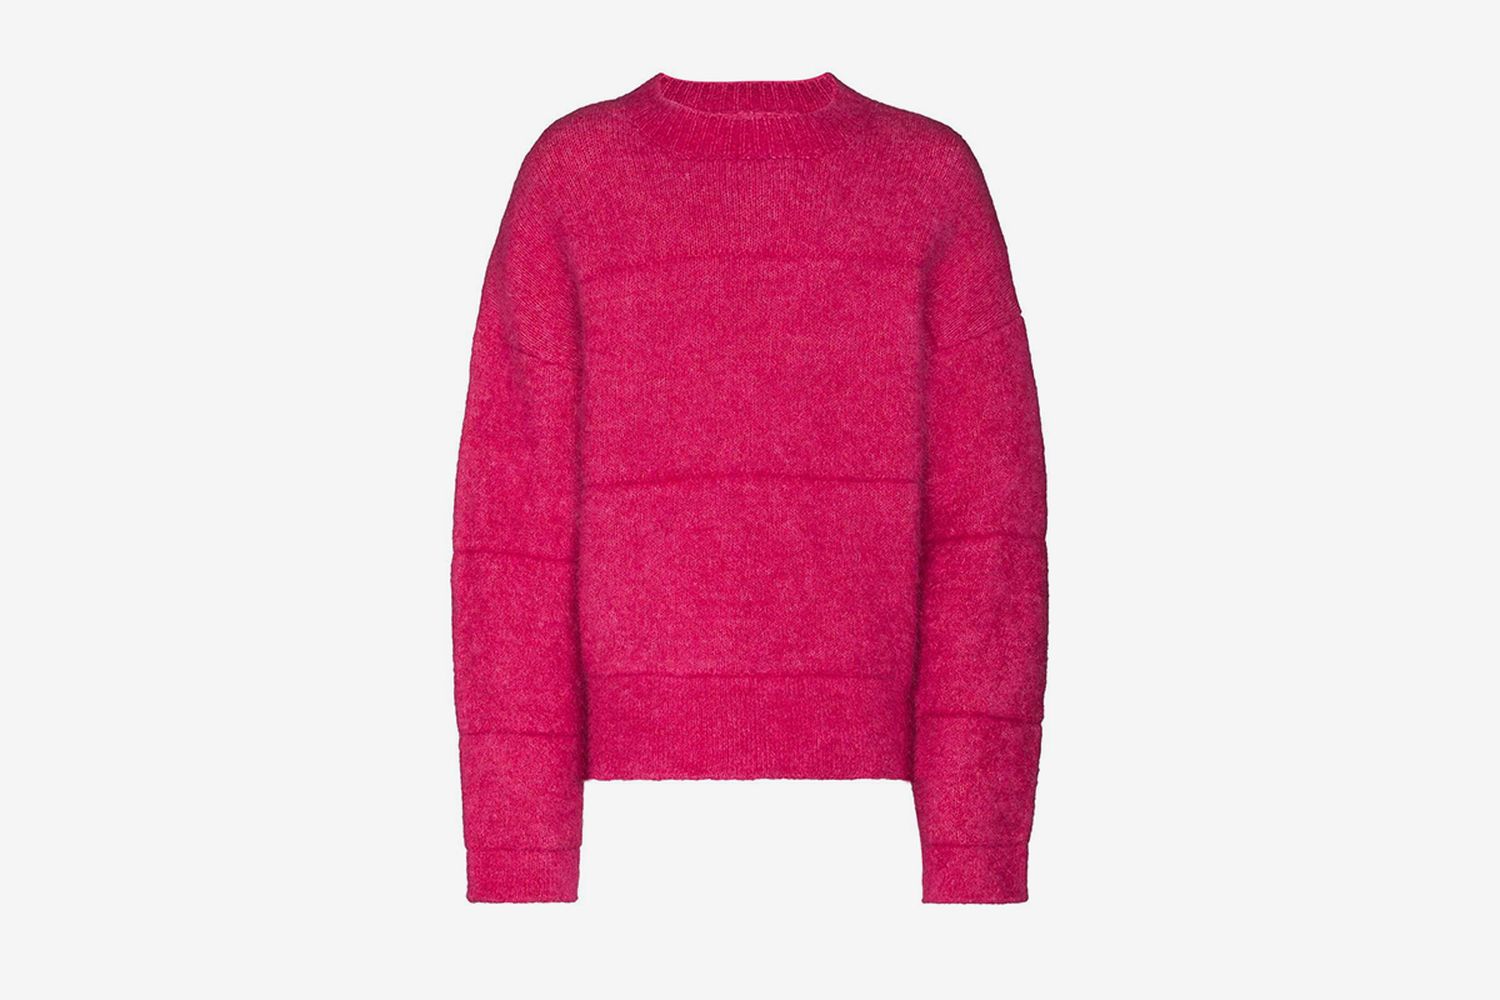 Knitted Crew Neck Jumper